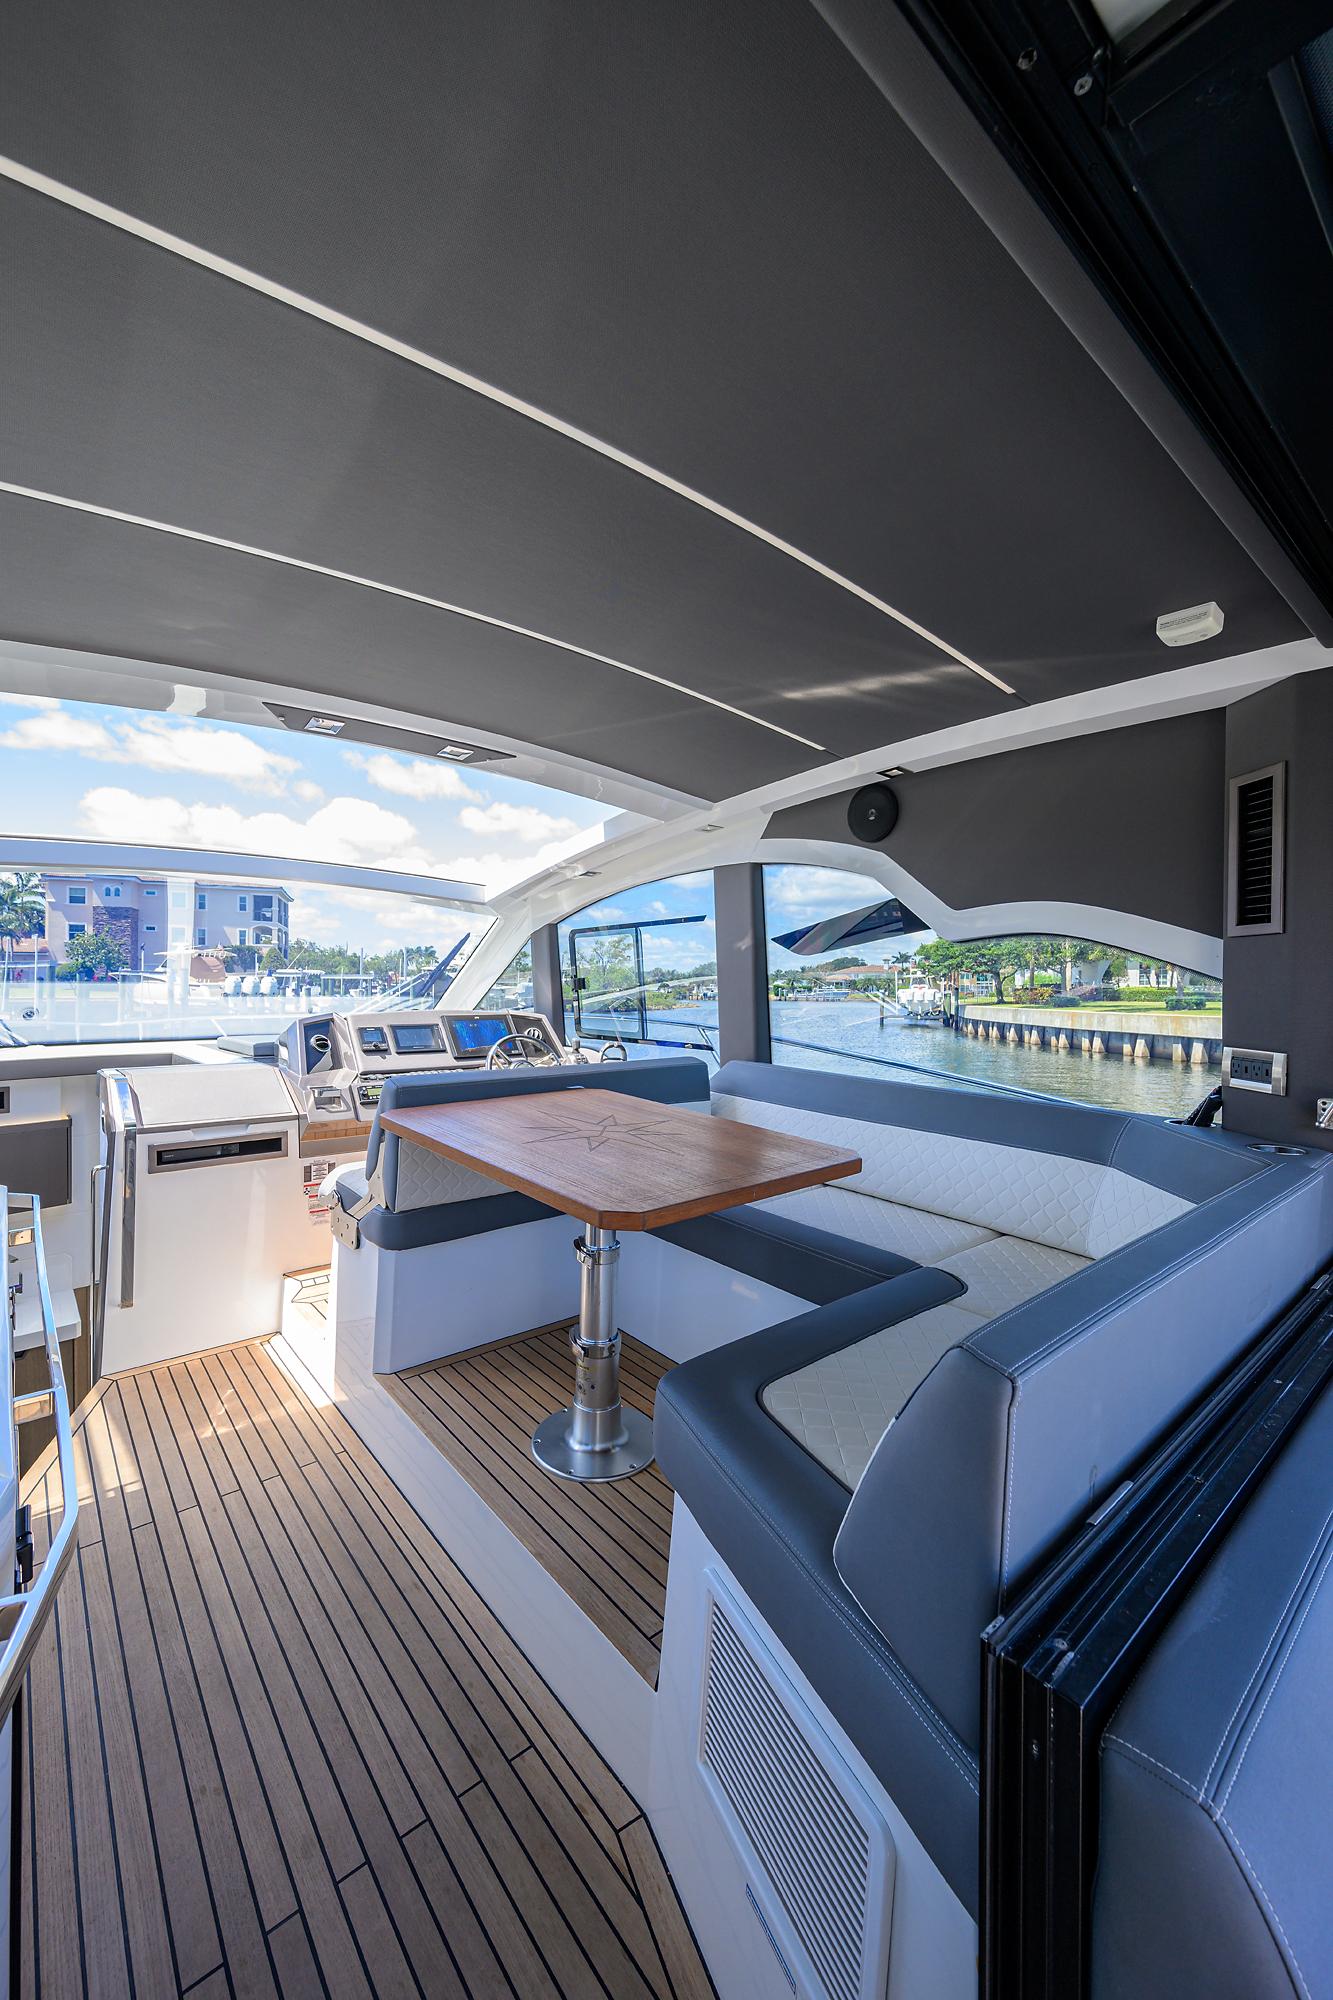 2021 Galeon - Outdoor galley/lounge